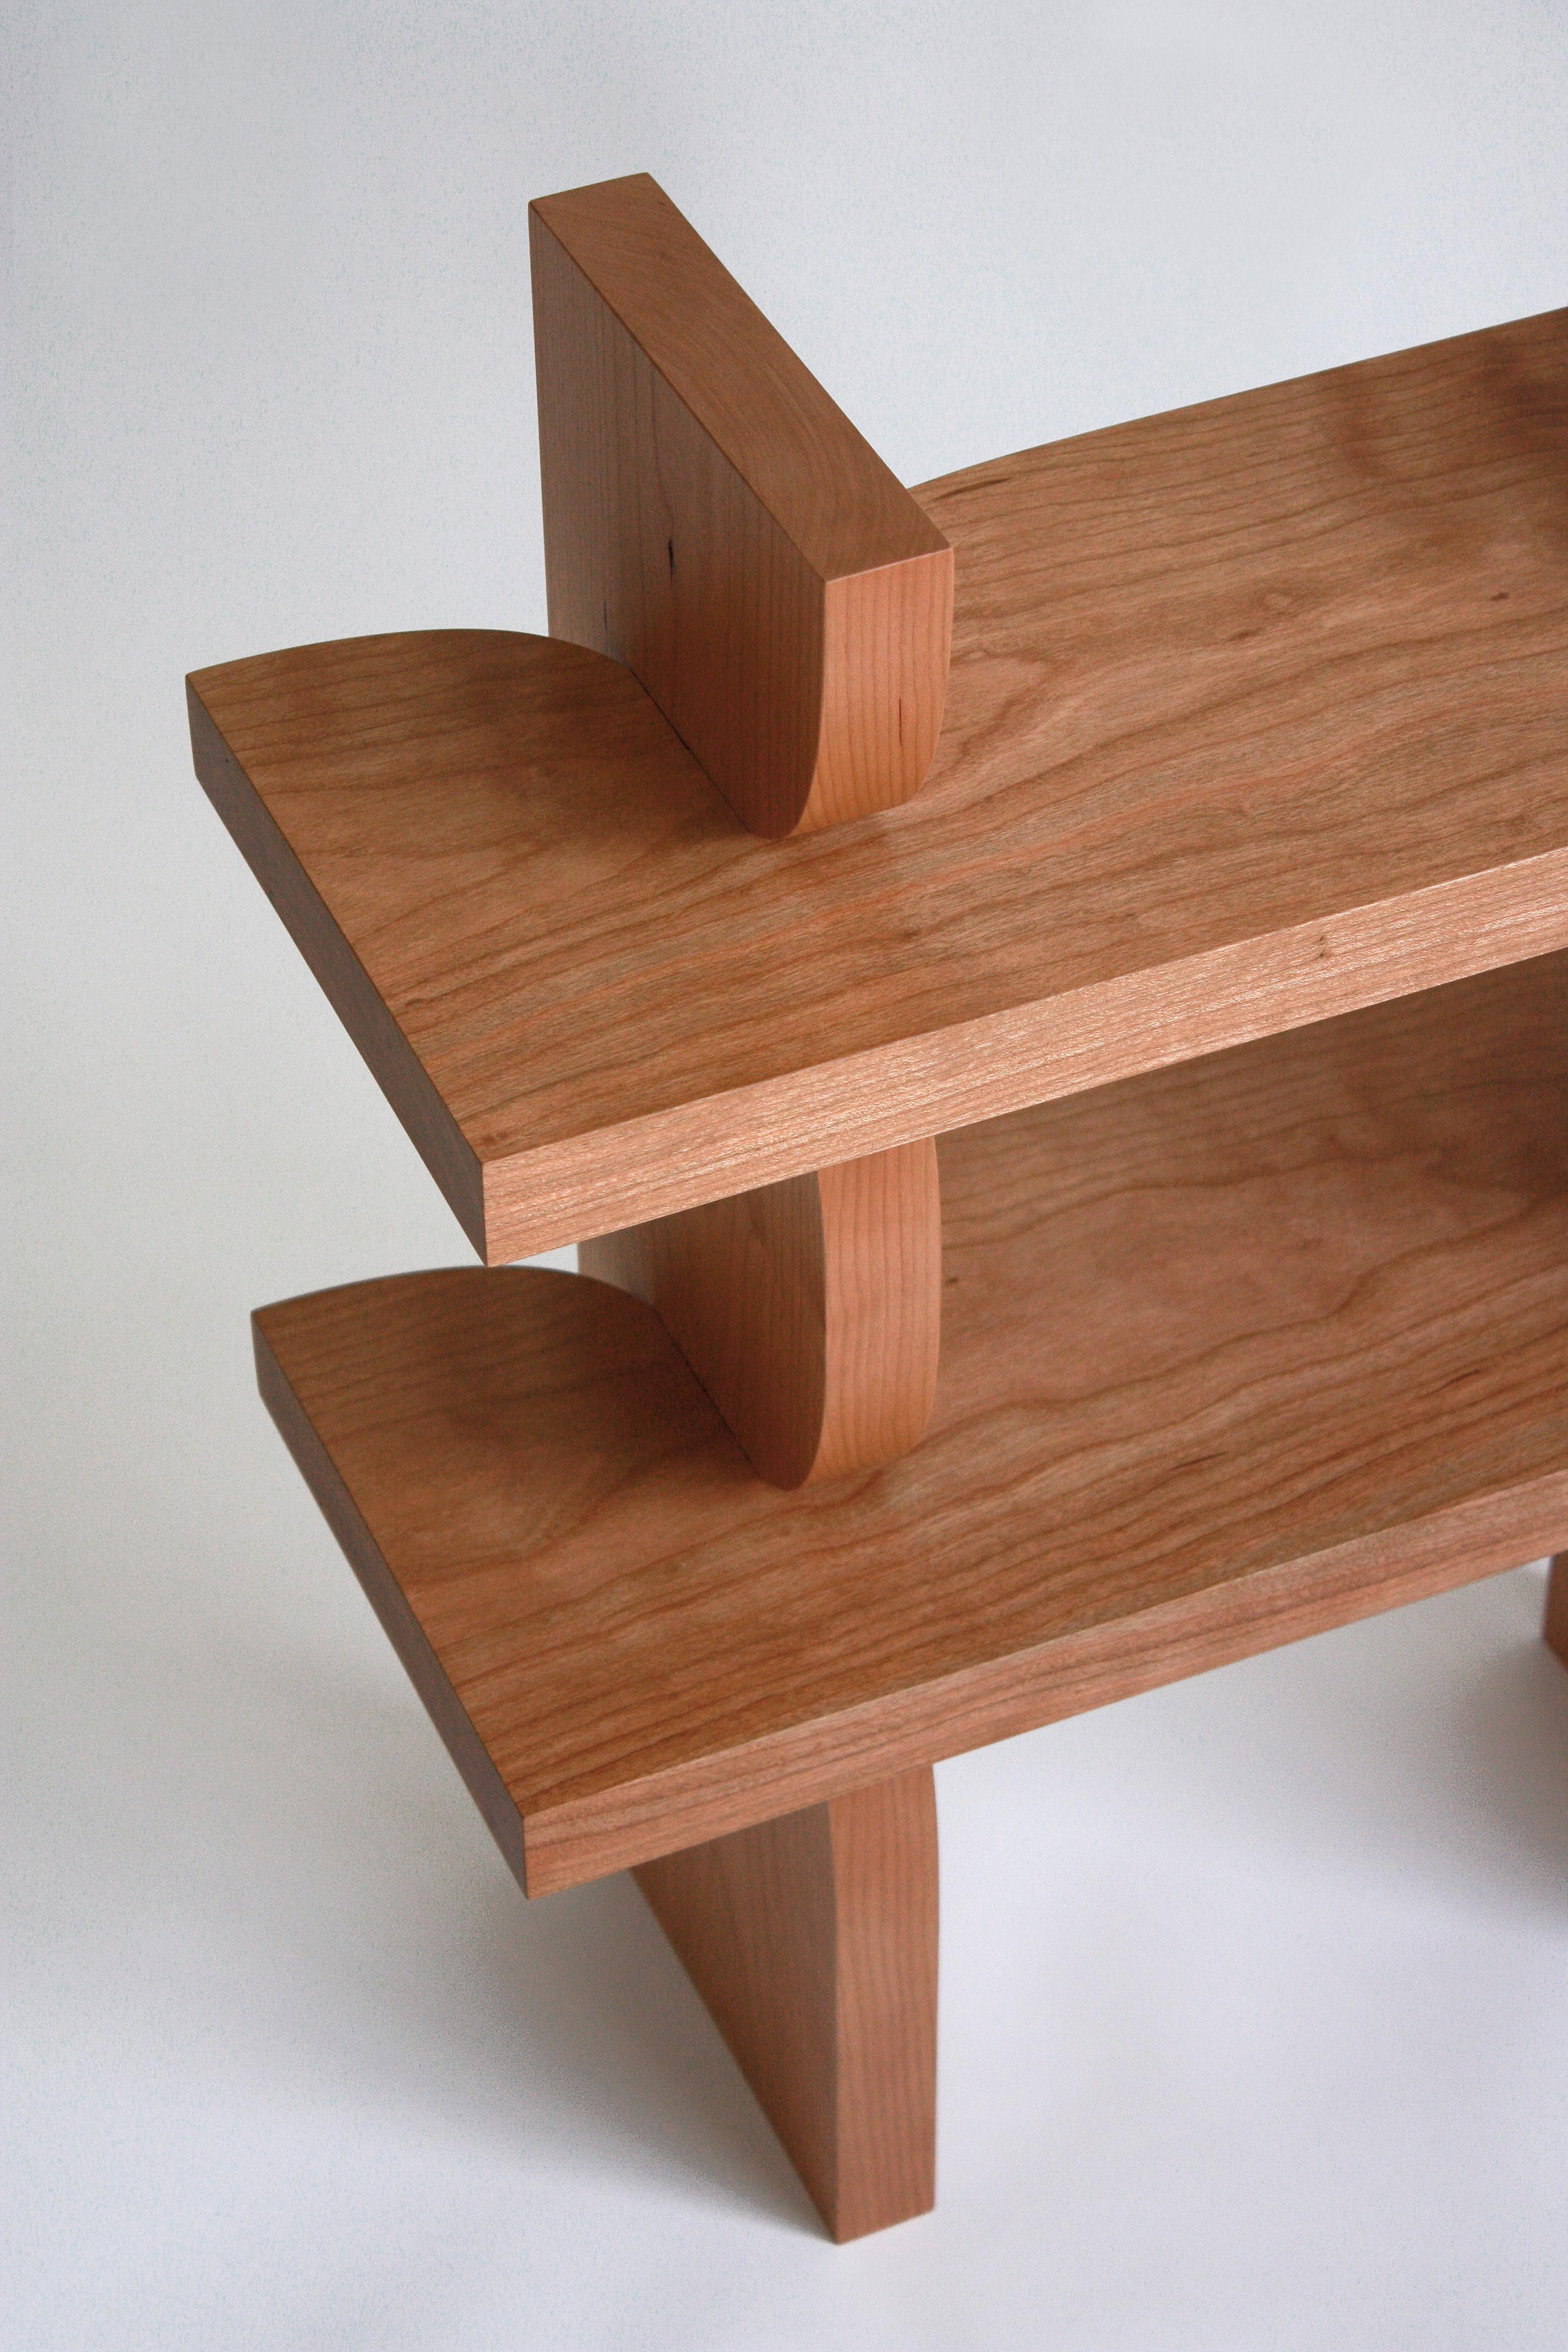 Dutch Between a Rock and a Hard Place Shelf by from Solid Cherry Wood, Maria Tyakina For Sale